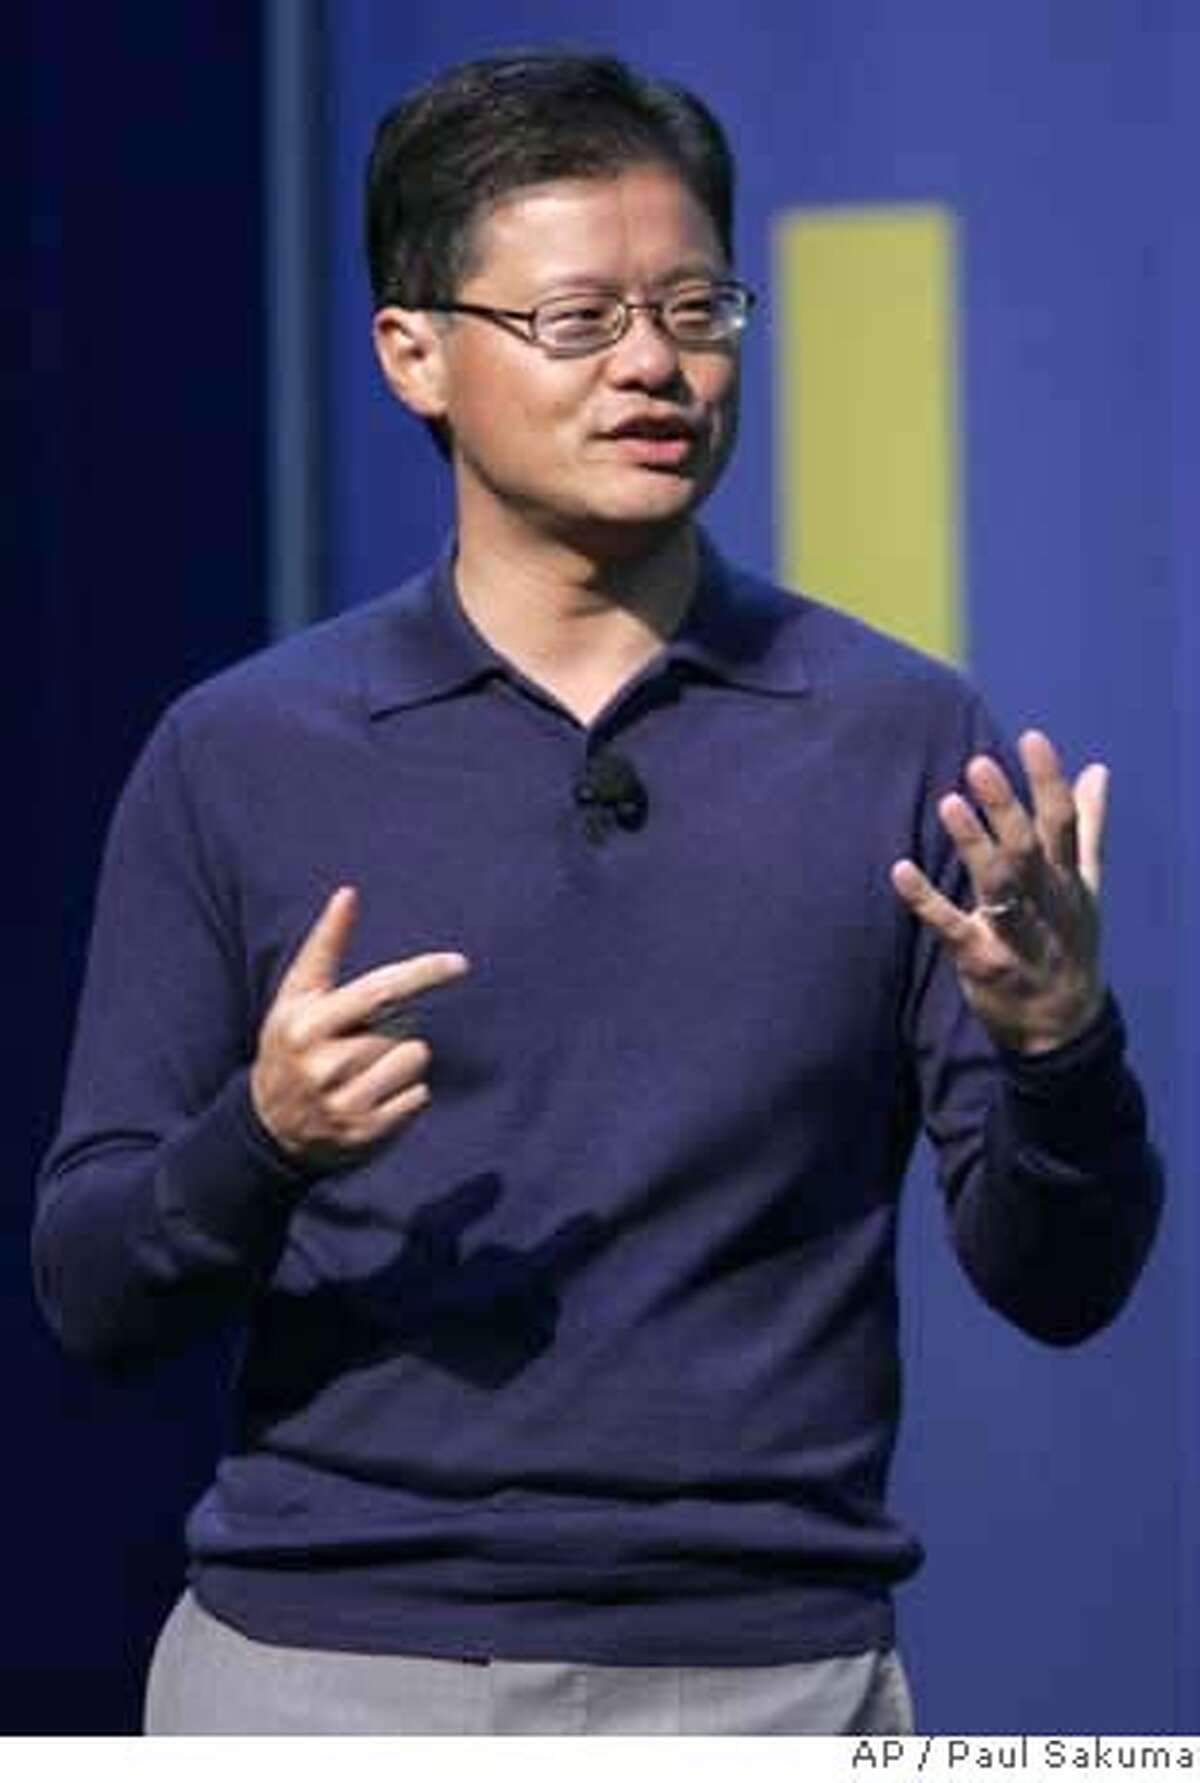 Yahoo CEO Jerry Yang gestures during his speech at the Consumer Electronics Show in Las Vegas, Jan. 6, 2008. Google Chief Executive Officer Eric Schmidt called Yang Friday to offer his help in repelling Microsoft, according to a report Sunday on The Wall Street Journal's Web site, which cited anonymous people familiar with the matter. (AP Photo/Paul Sakuma) JAN. 6, 2008 PHOTO. NOT A FILE.